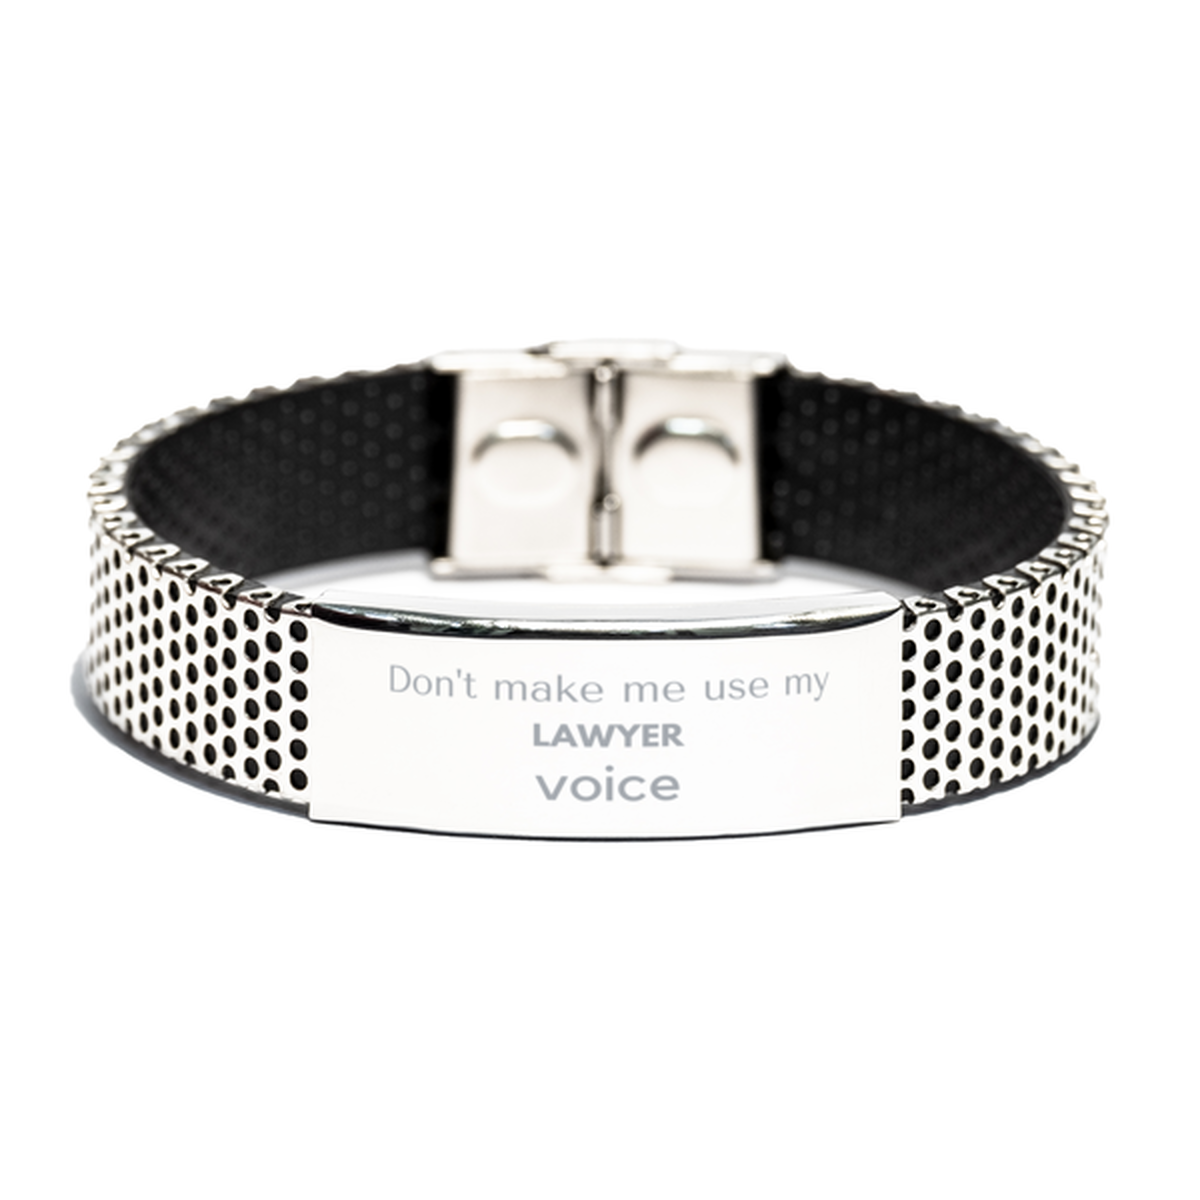 Don't make me use my Lawyer voice, Sarcasm Lawyer Gifts, Christmas Lawyer Stainless Steel Bracelet Birthday Unique Gifts For Lawyer Coworkers, Men, Women, Colleague, Friends